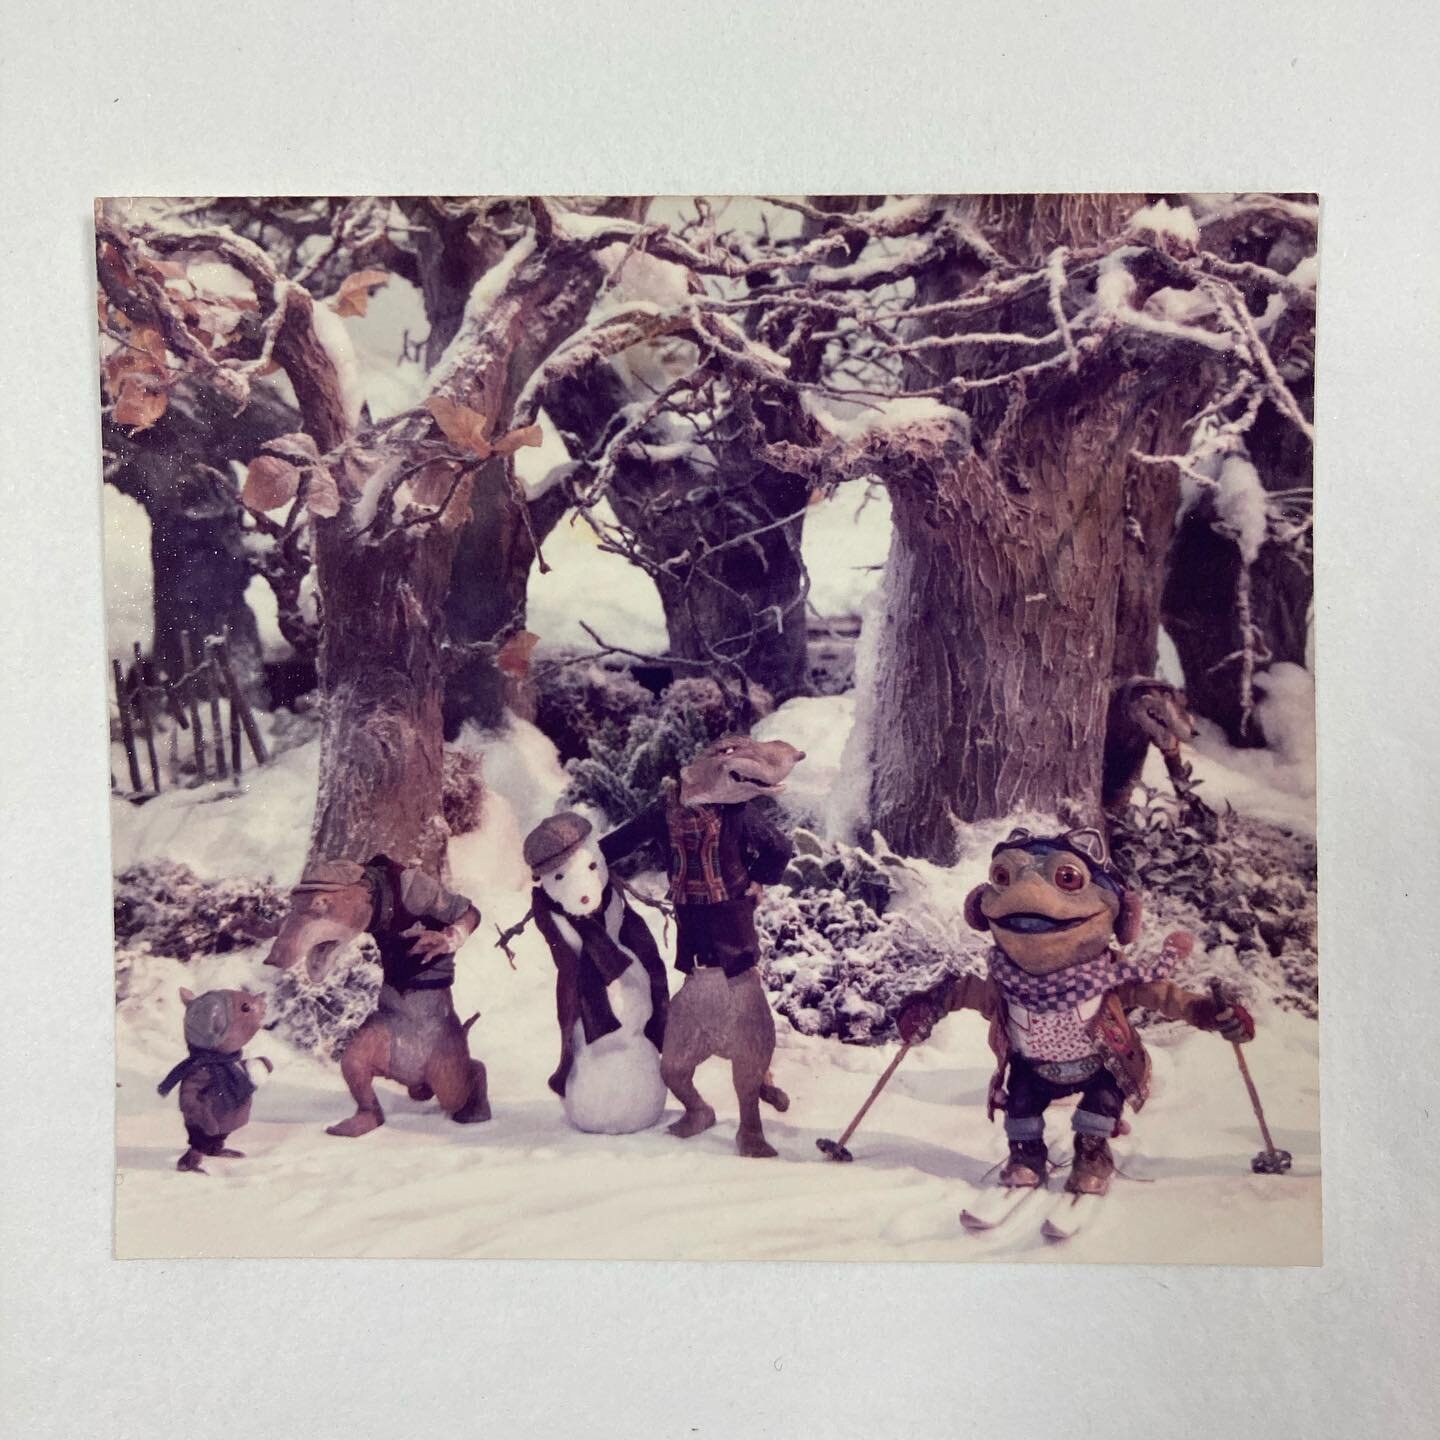 Come on snow! Merry Christmas from all of us here at the Cosgrove Hall Films Archive, sending some Christmas warmth your way. 

A still from the stop motion series Wind in the Willows courtesy of Joe Dembinski, talented Cosgrove Hall cameraman and ci